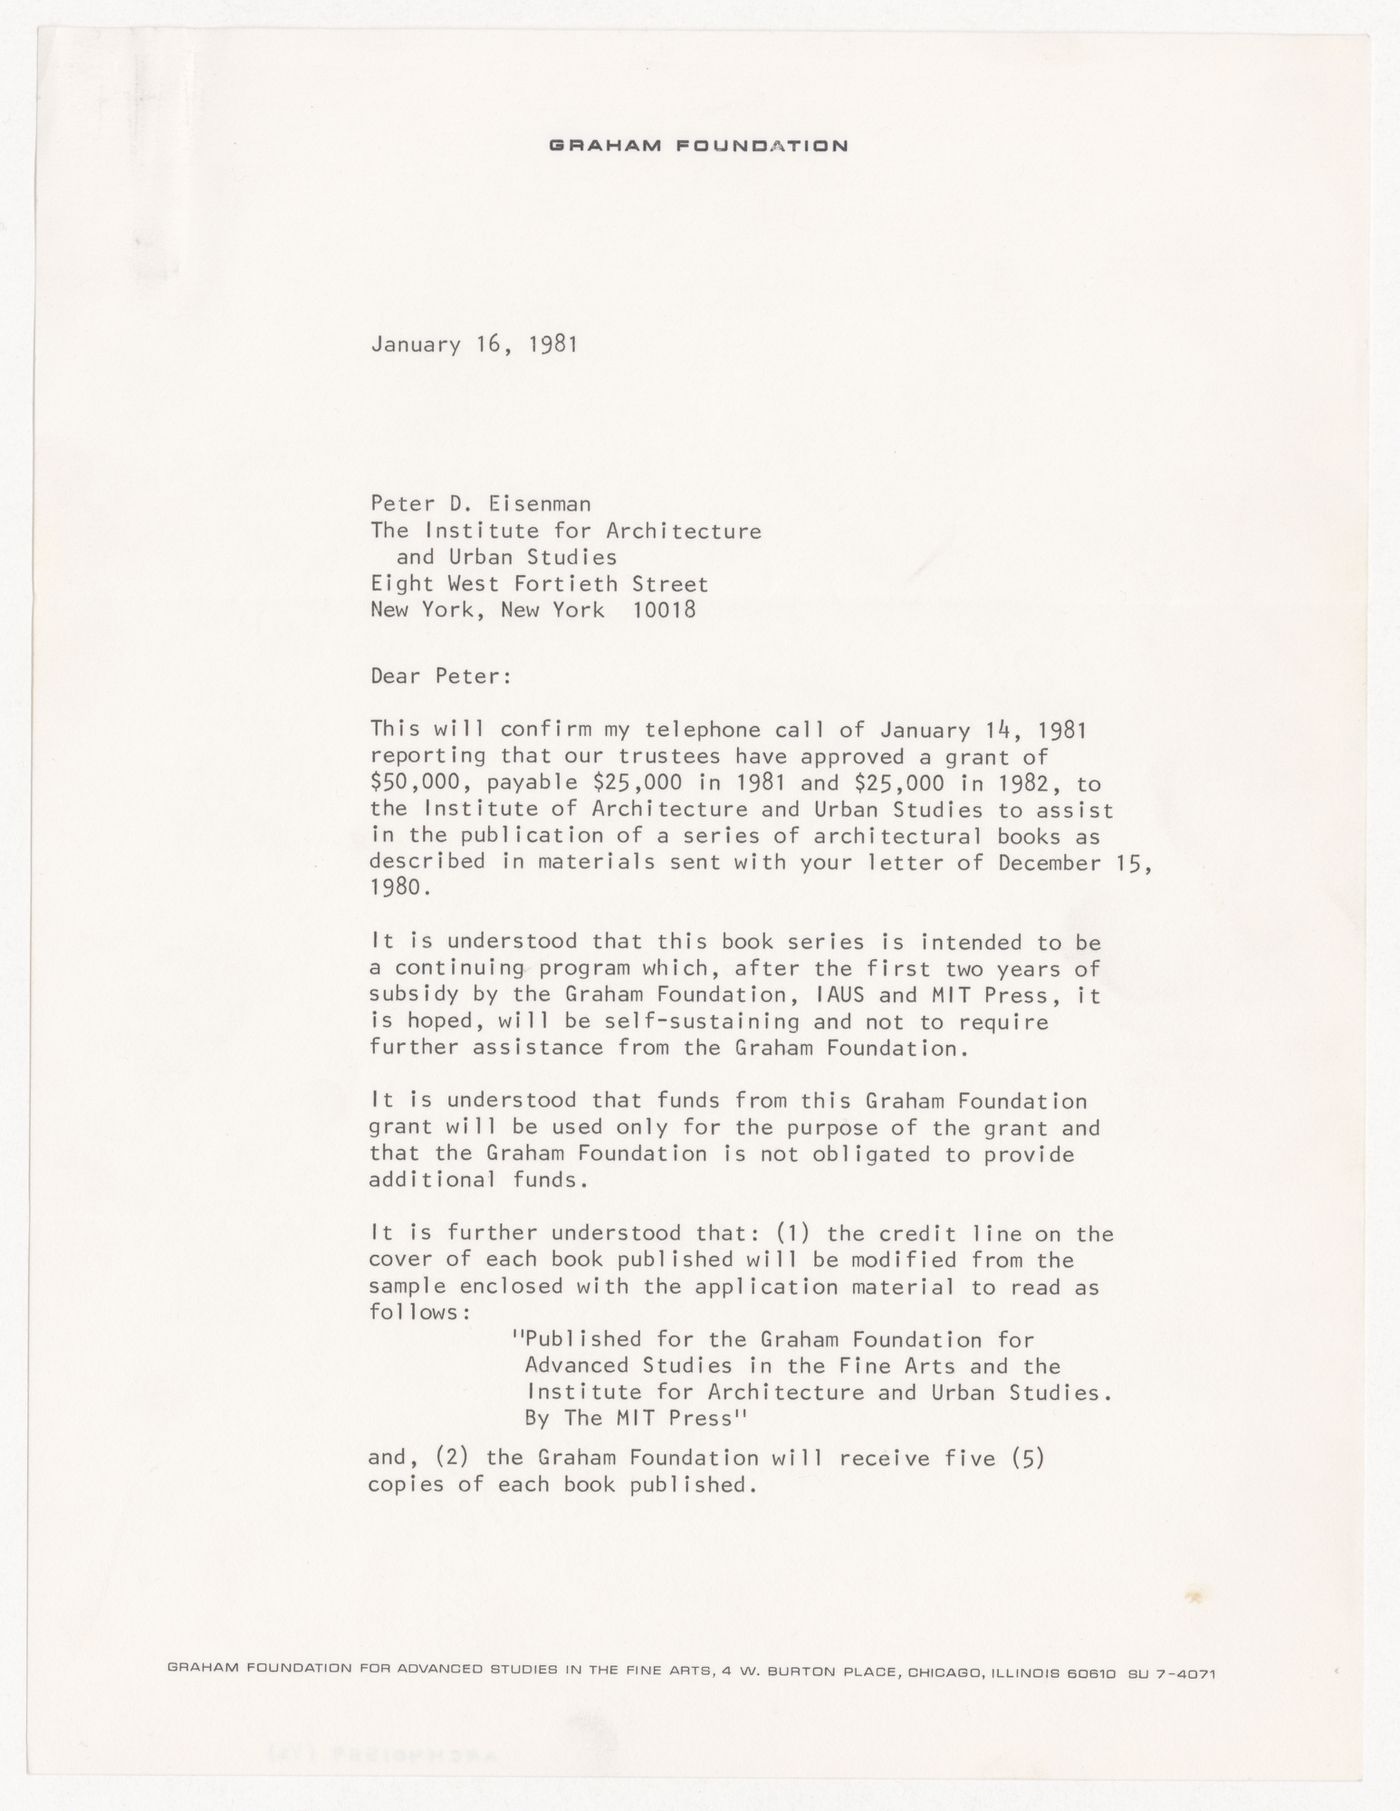 Letter from Carter H. Manny Jr. to Peter D. Eisenman about award of a grant from the Graham Foundation